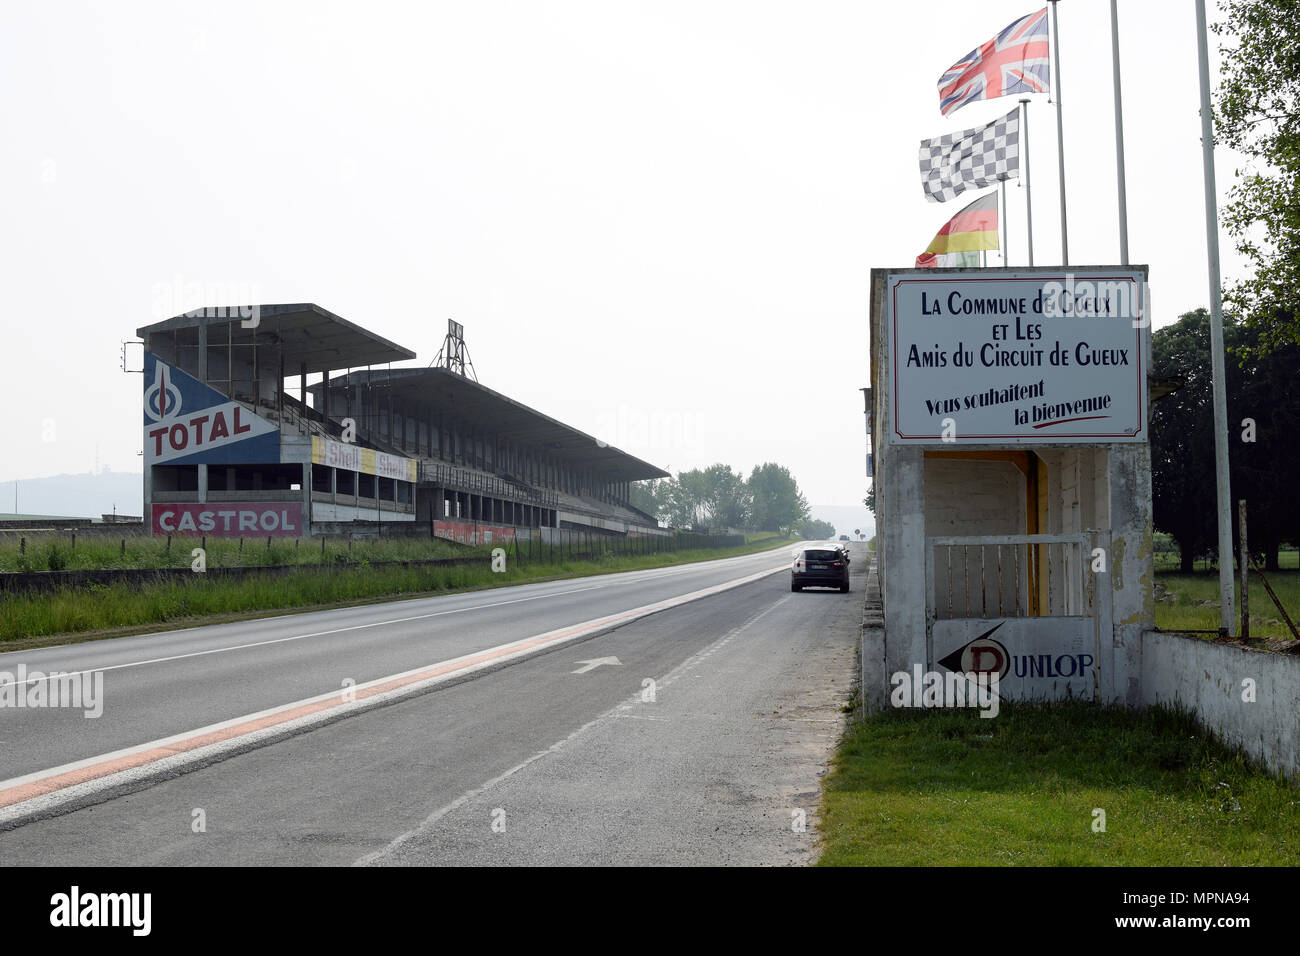 UEUX, FRANCE - May 15, 2018: Historic Reims-Gueux circuit near Reims. Stock Photo